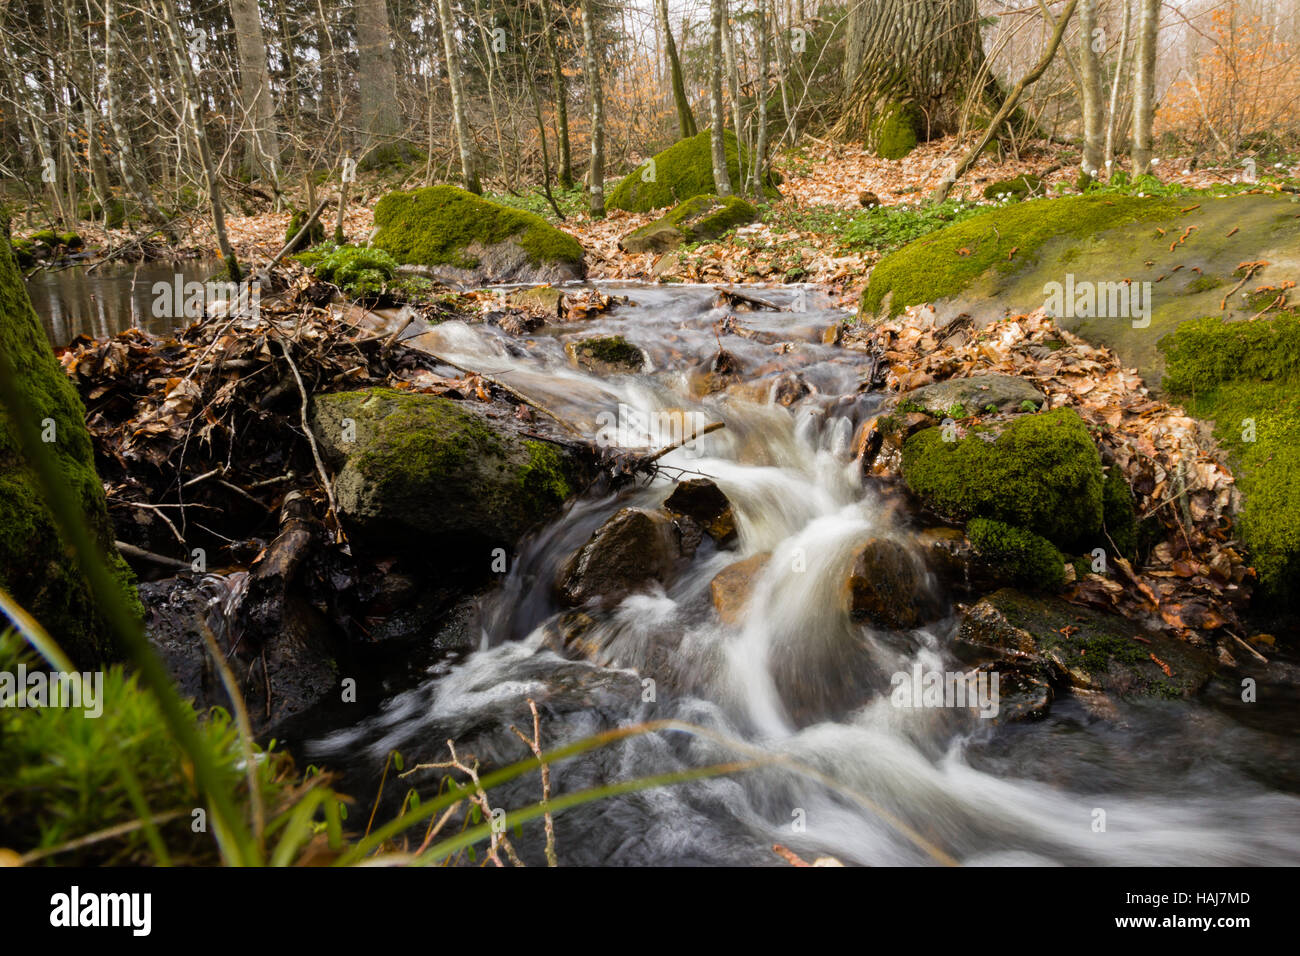 Water flowing in this spring stream with long exposure Stock Photo